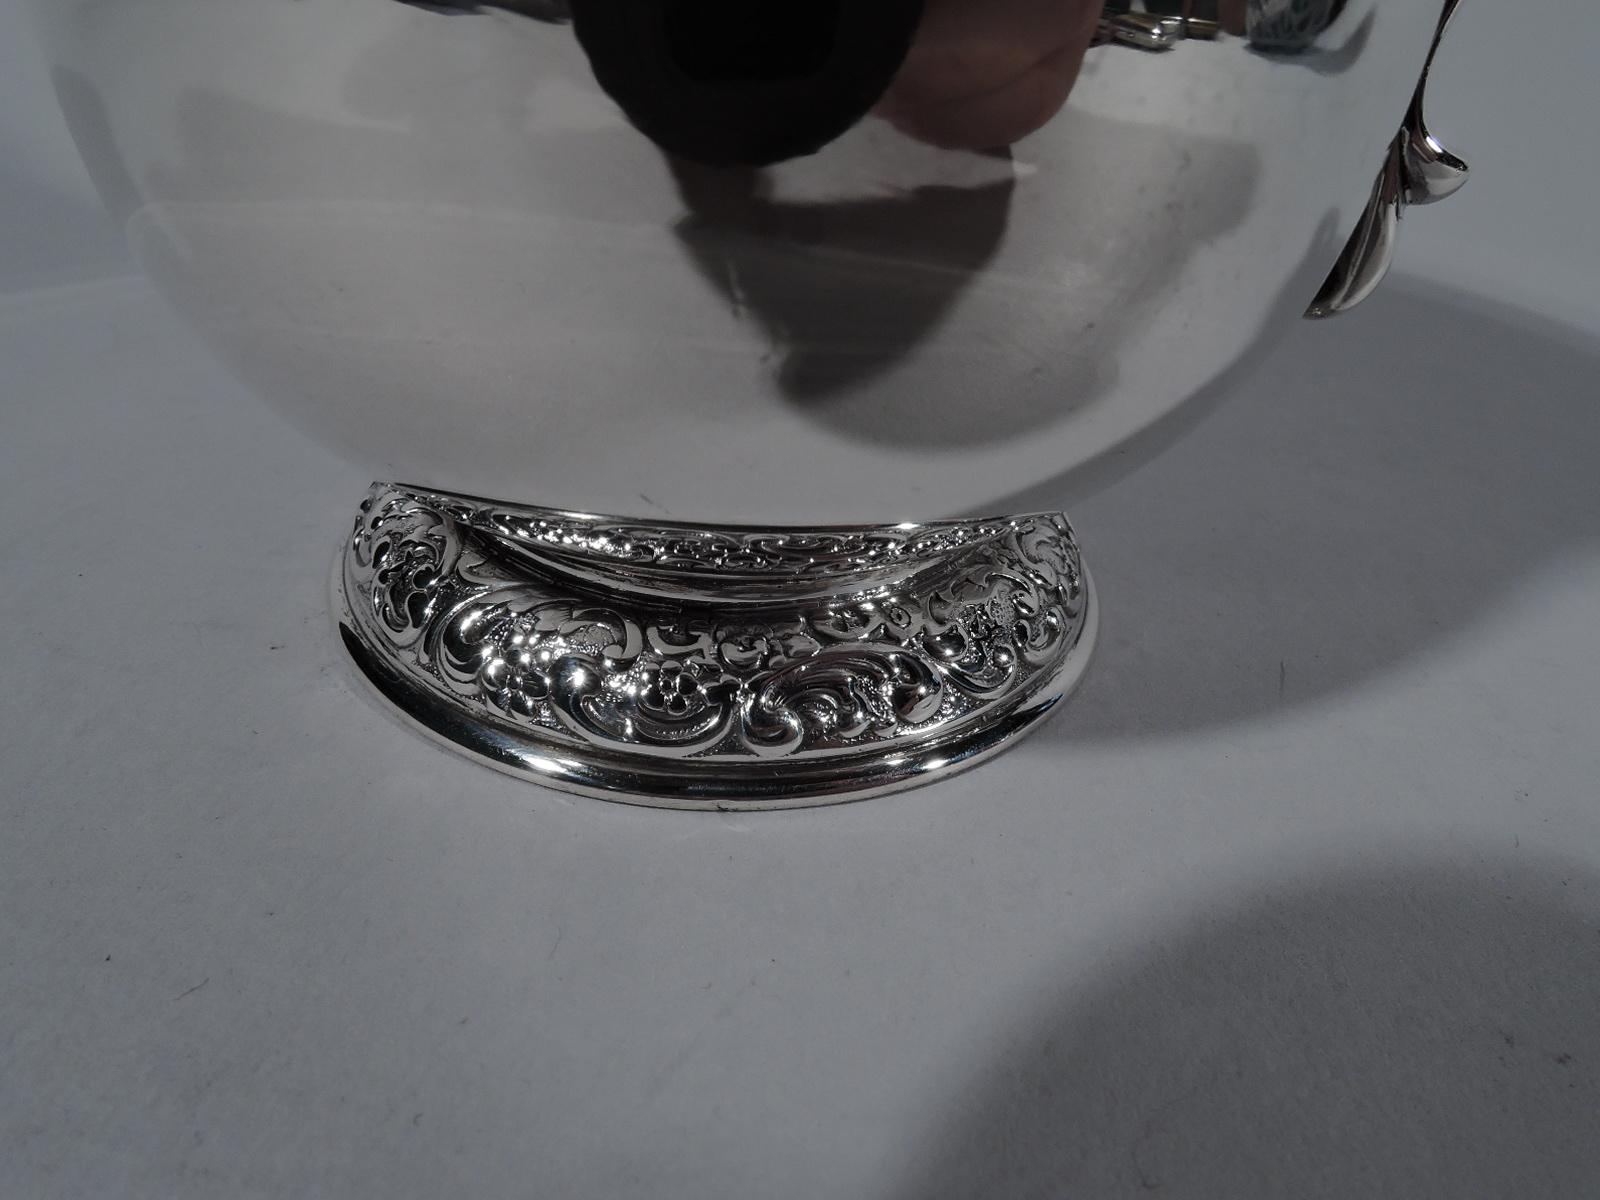 Early 20th Century Elegant American Edwardian Sterling Silver Baby Cup by Tiffany & Co.